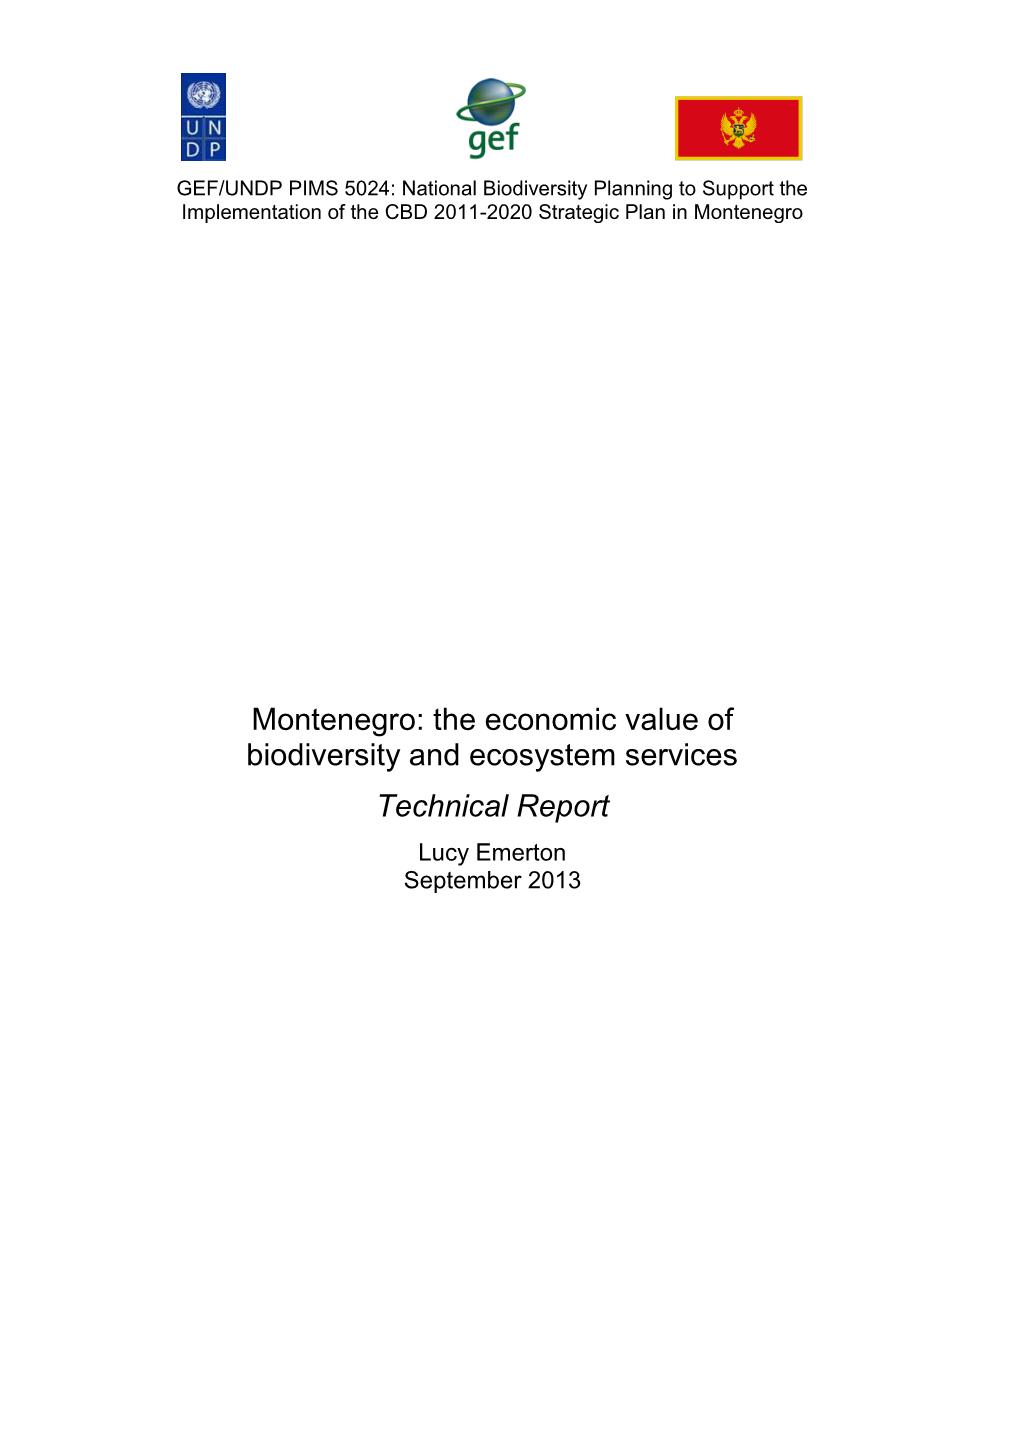 Montenegro: the Economic Value of Biodiversity and Ecosystem Services Technical Report Lucy Emerton September 2013